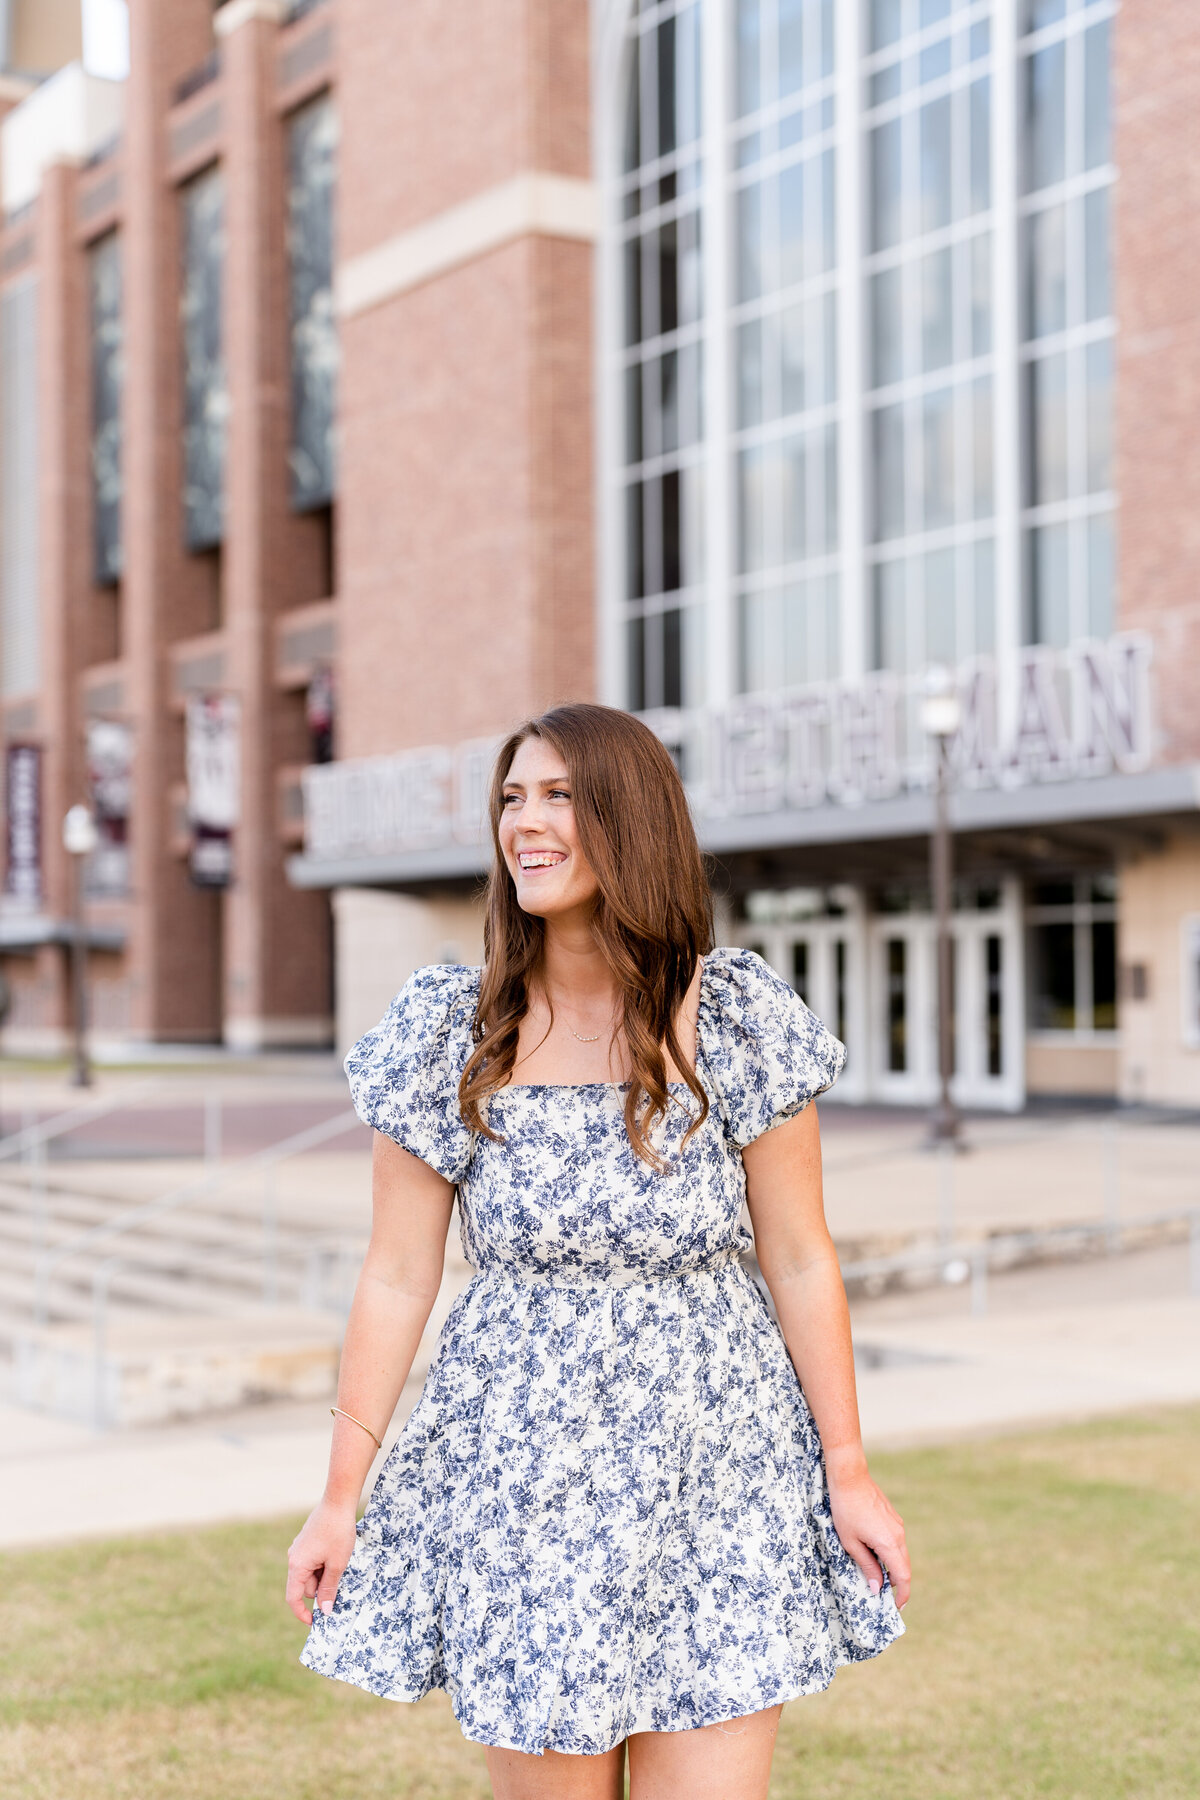 Texas A&M senior girl swishing dress and laughing over shoulder while walking and wearing blue and white dress in front of Kyle Field